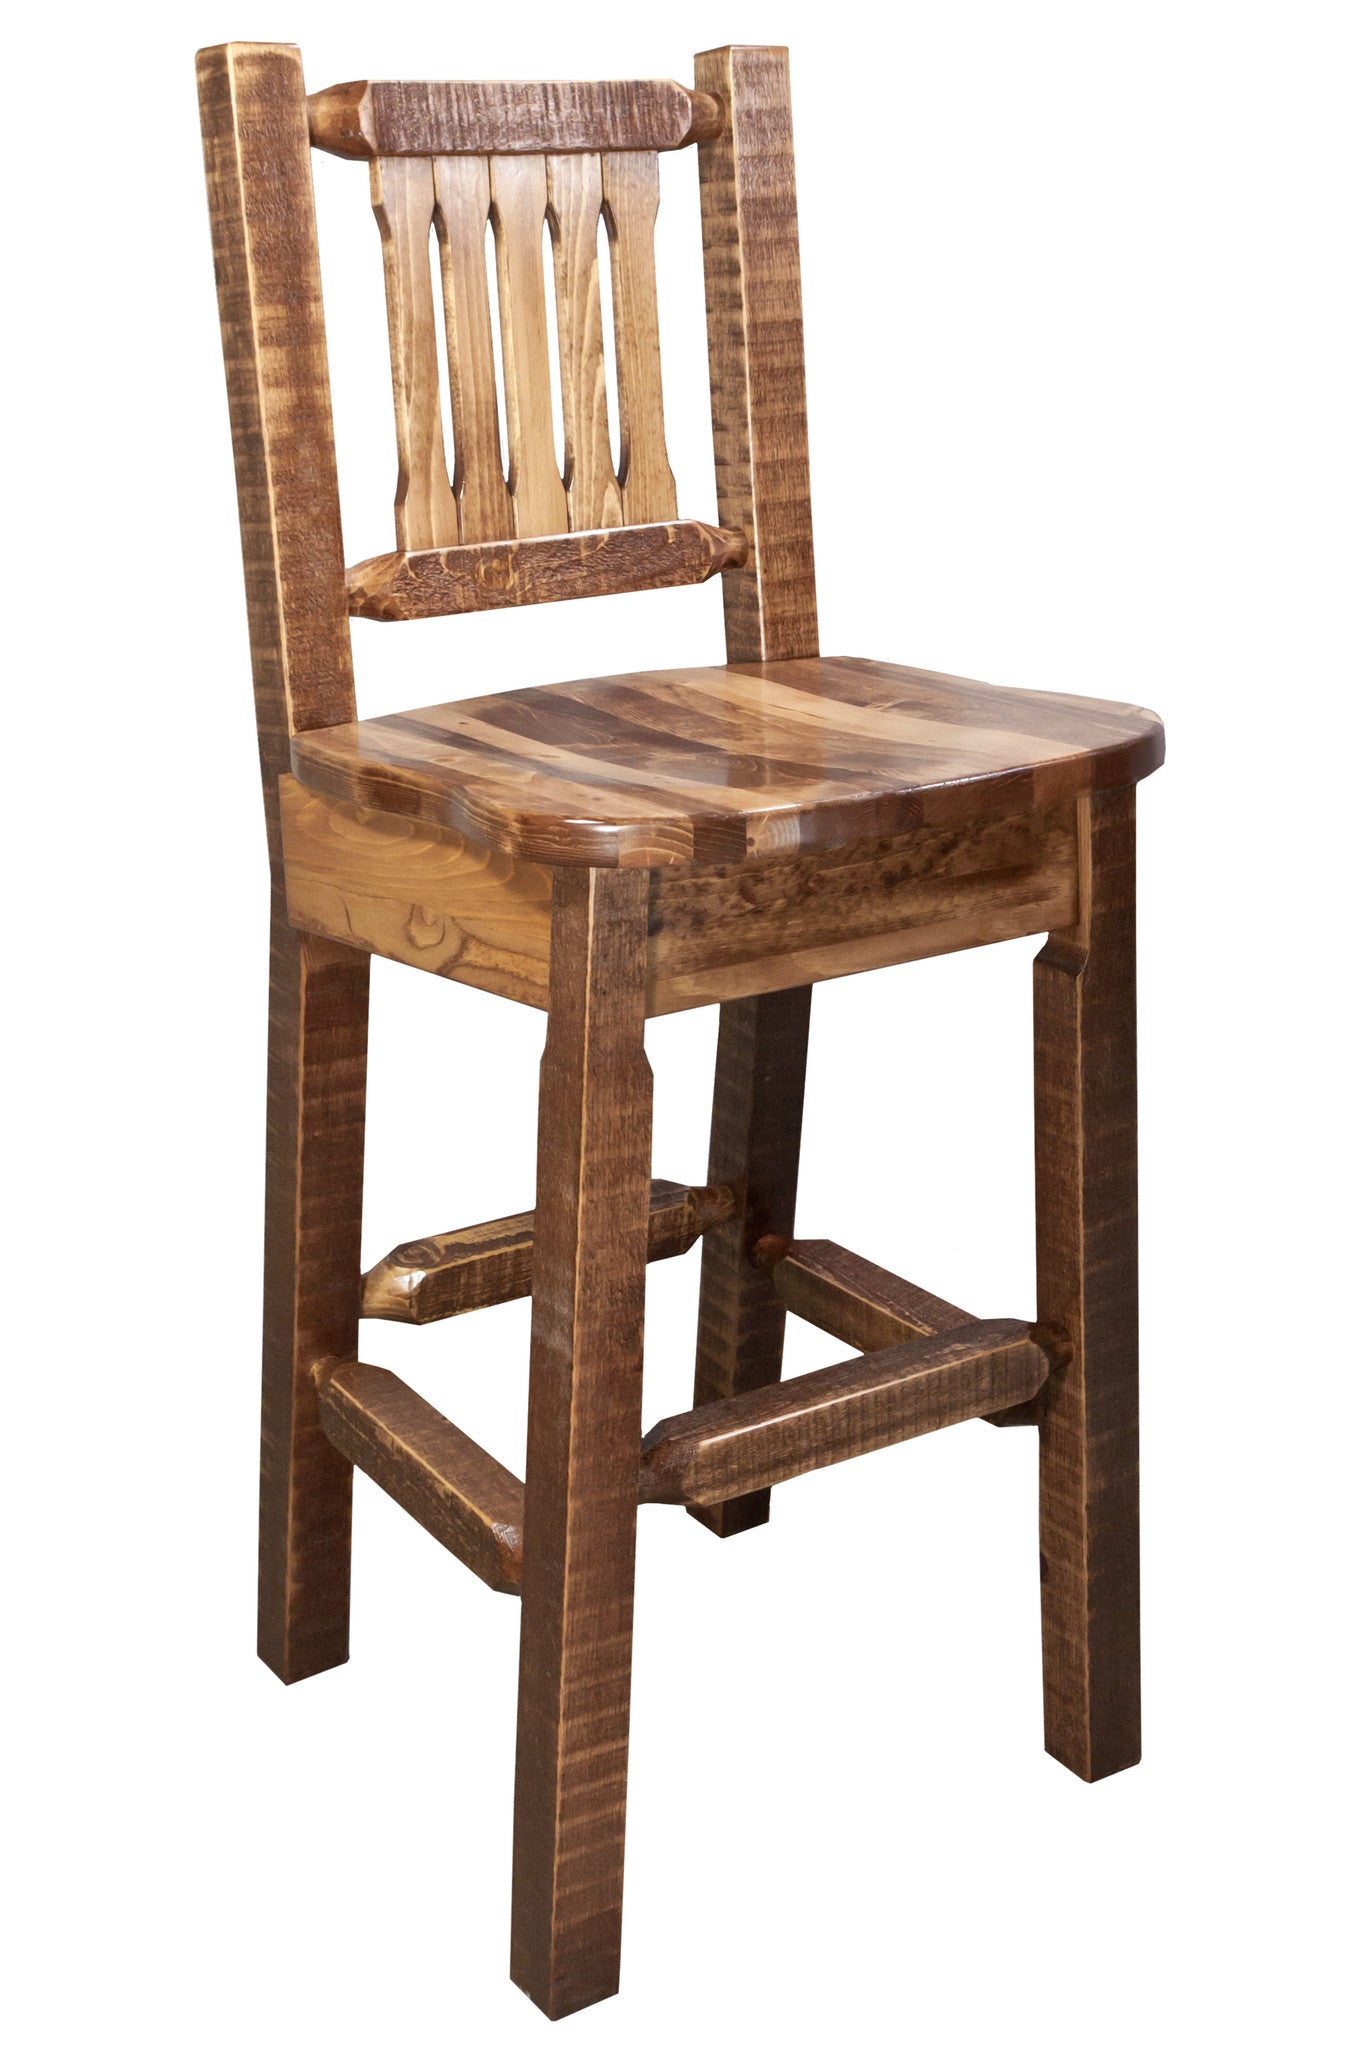 Montana Woodworks Homestead Collection Wood Barstool w/ Back w/ Ergonomic Wooden Seat